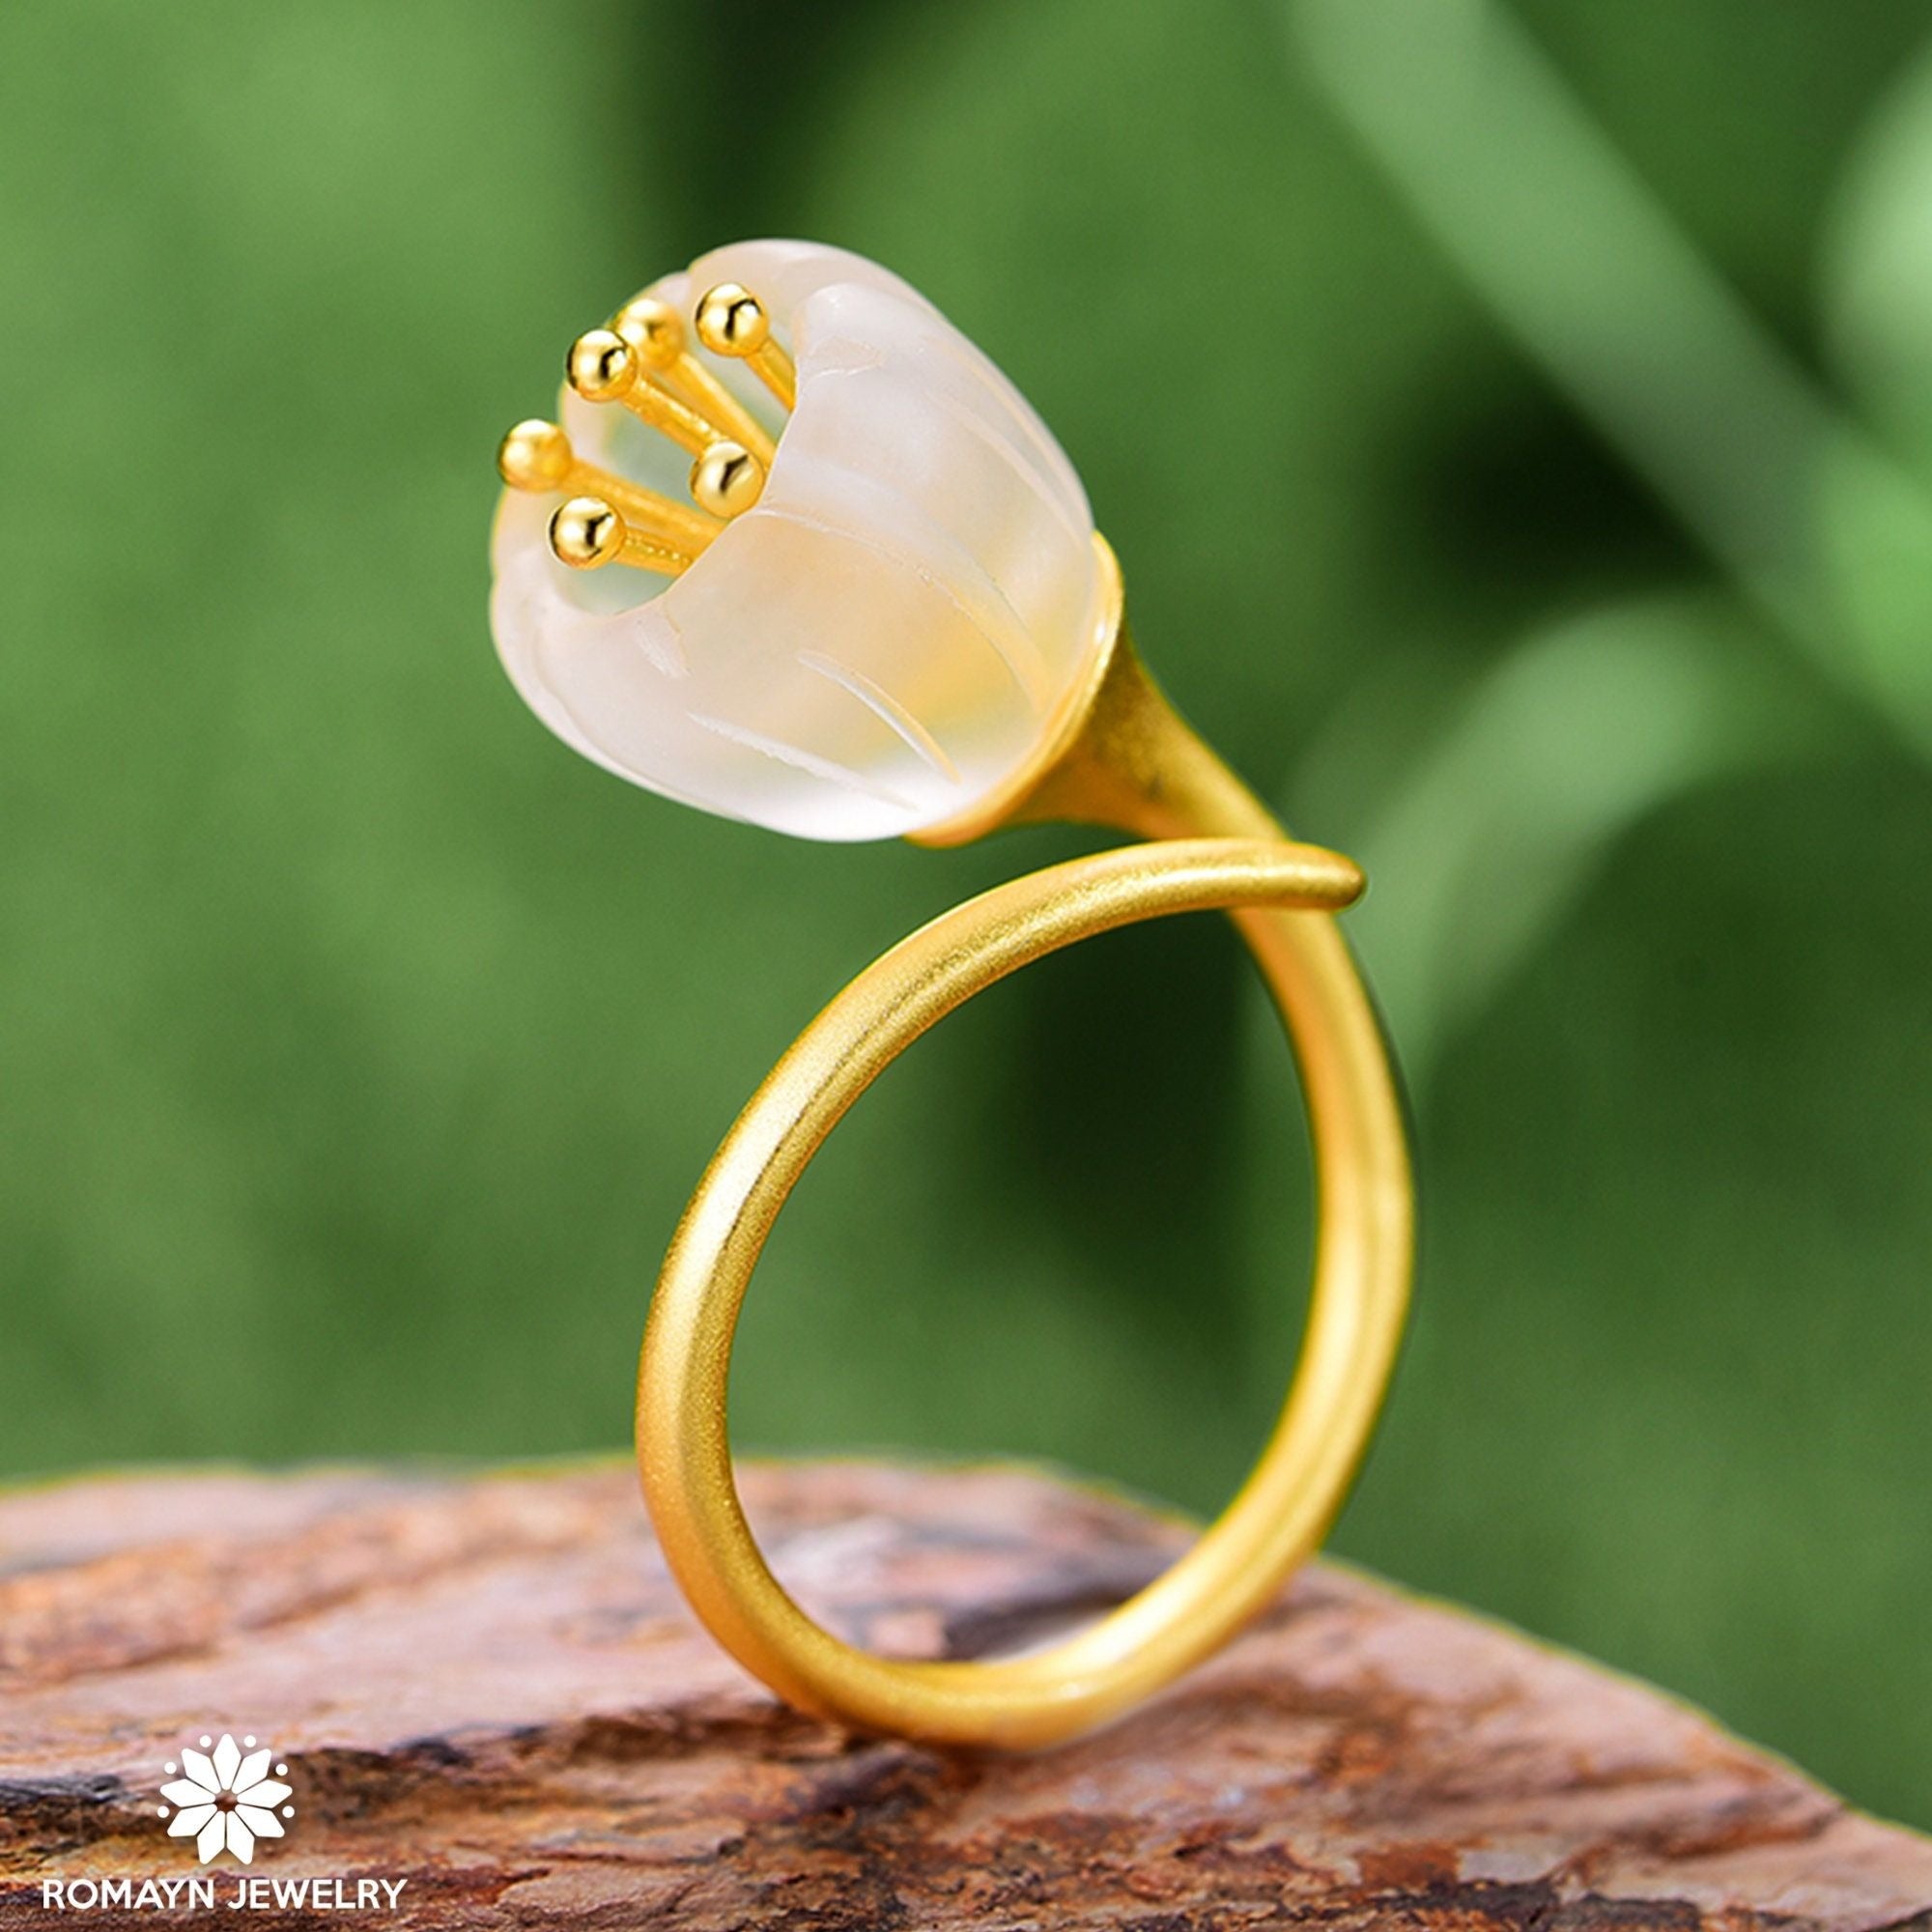 Amazon.com: Lily Ring, Lilly ring, Sterling Silver Ring, Flower Ring For  Women, Handmade Dainty Jewelry, Cute Floral Ring, Adjustable Wrap Ring,  Birth Flower Ring (7.5) : Handmade Products